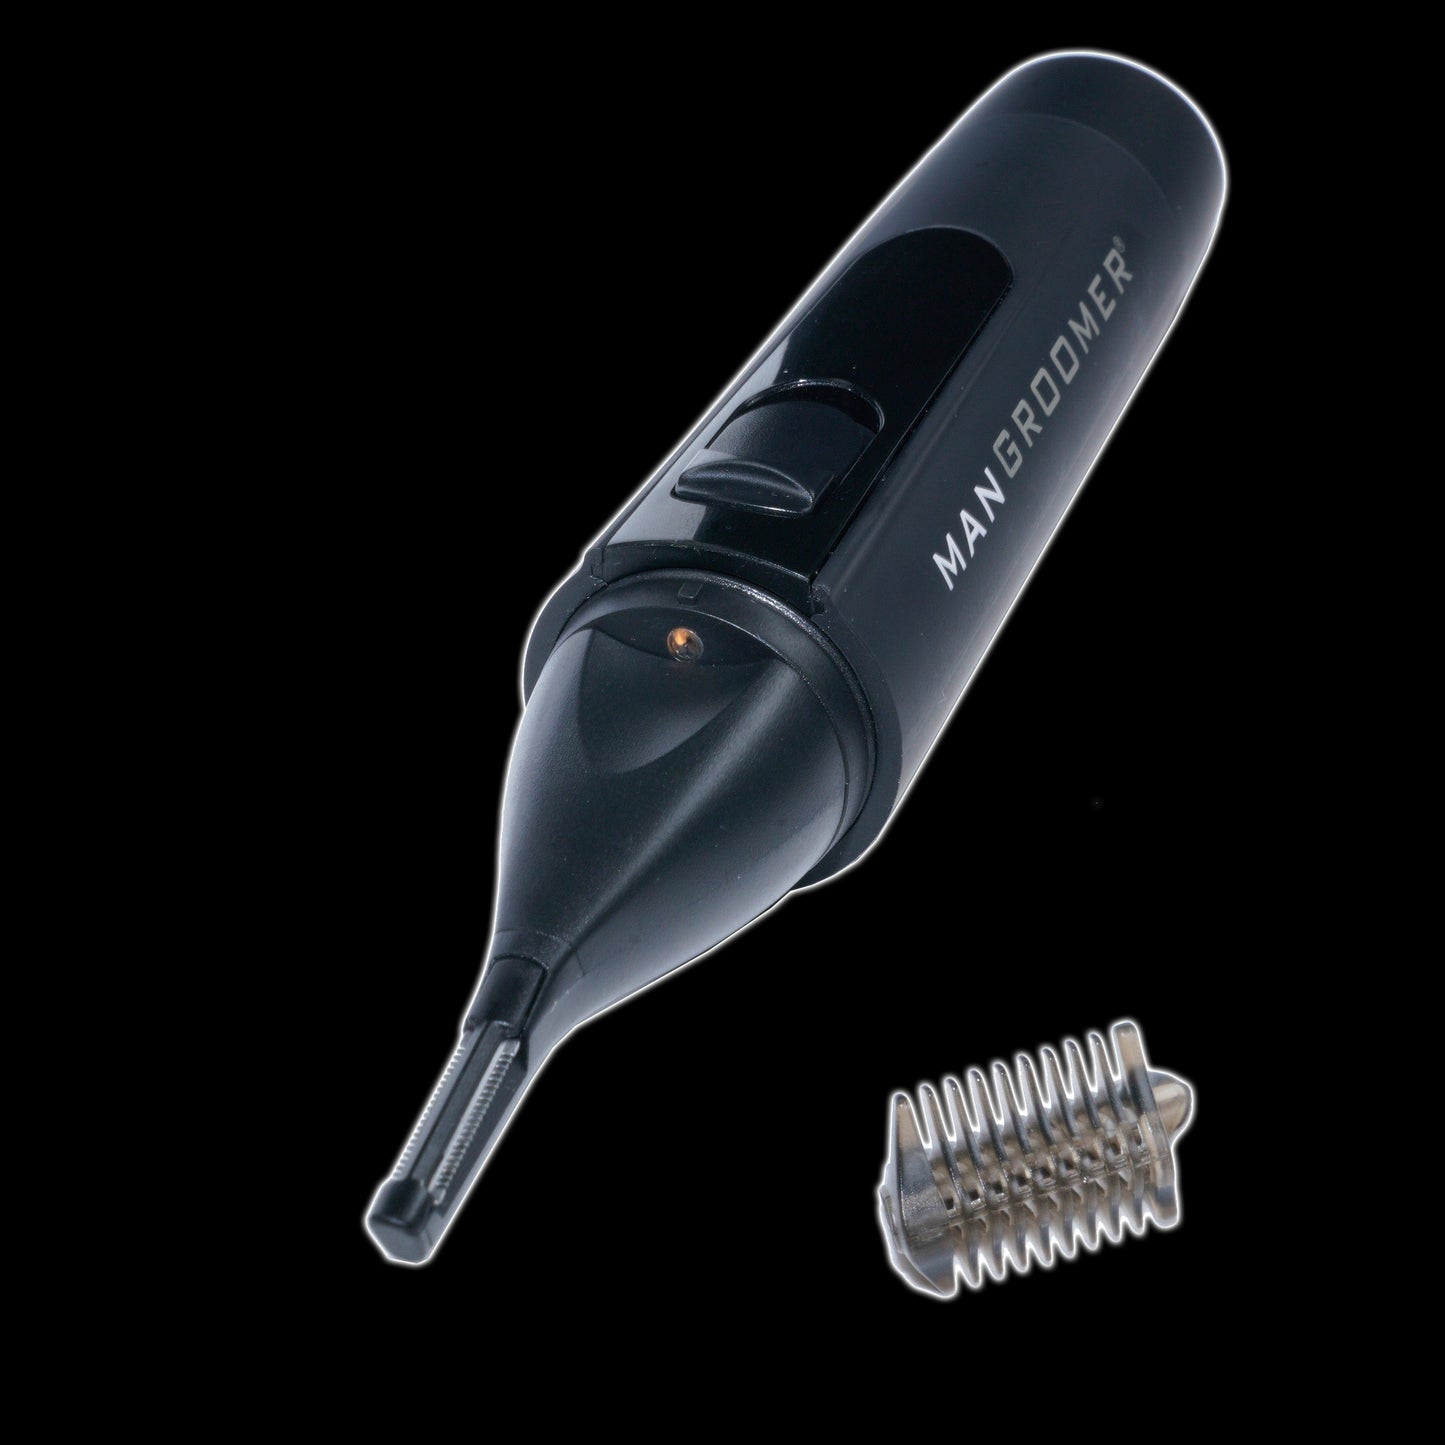 PROFESSIONAL PLUS+ Nose, Ear and Eyebrow Trimmer - front view